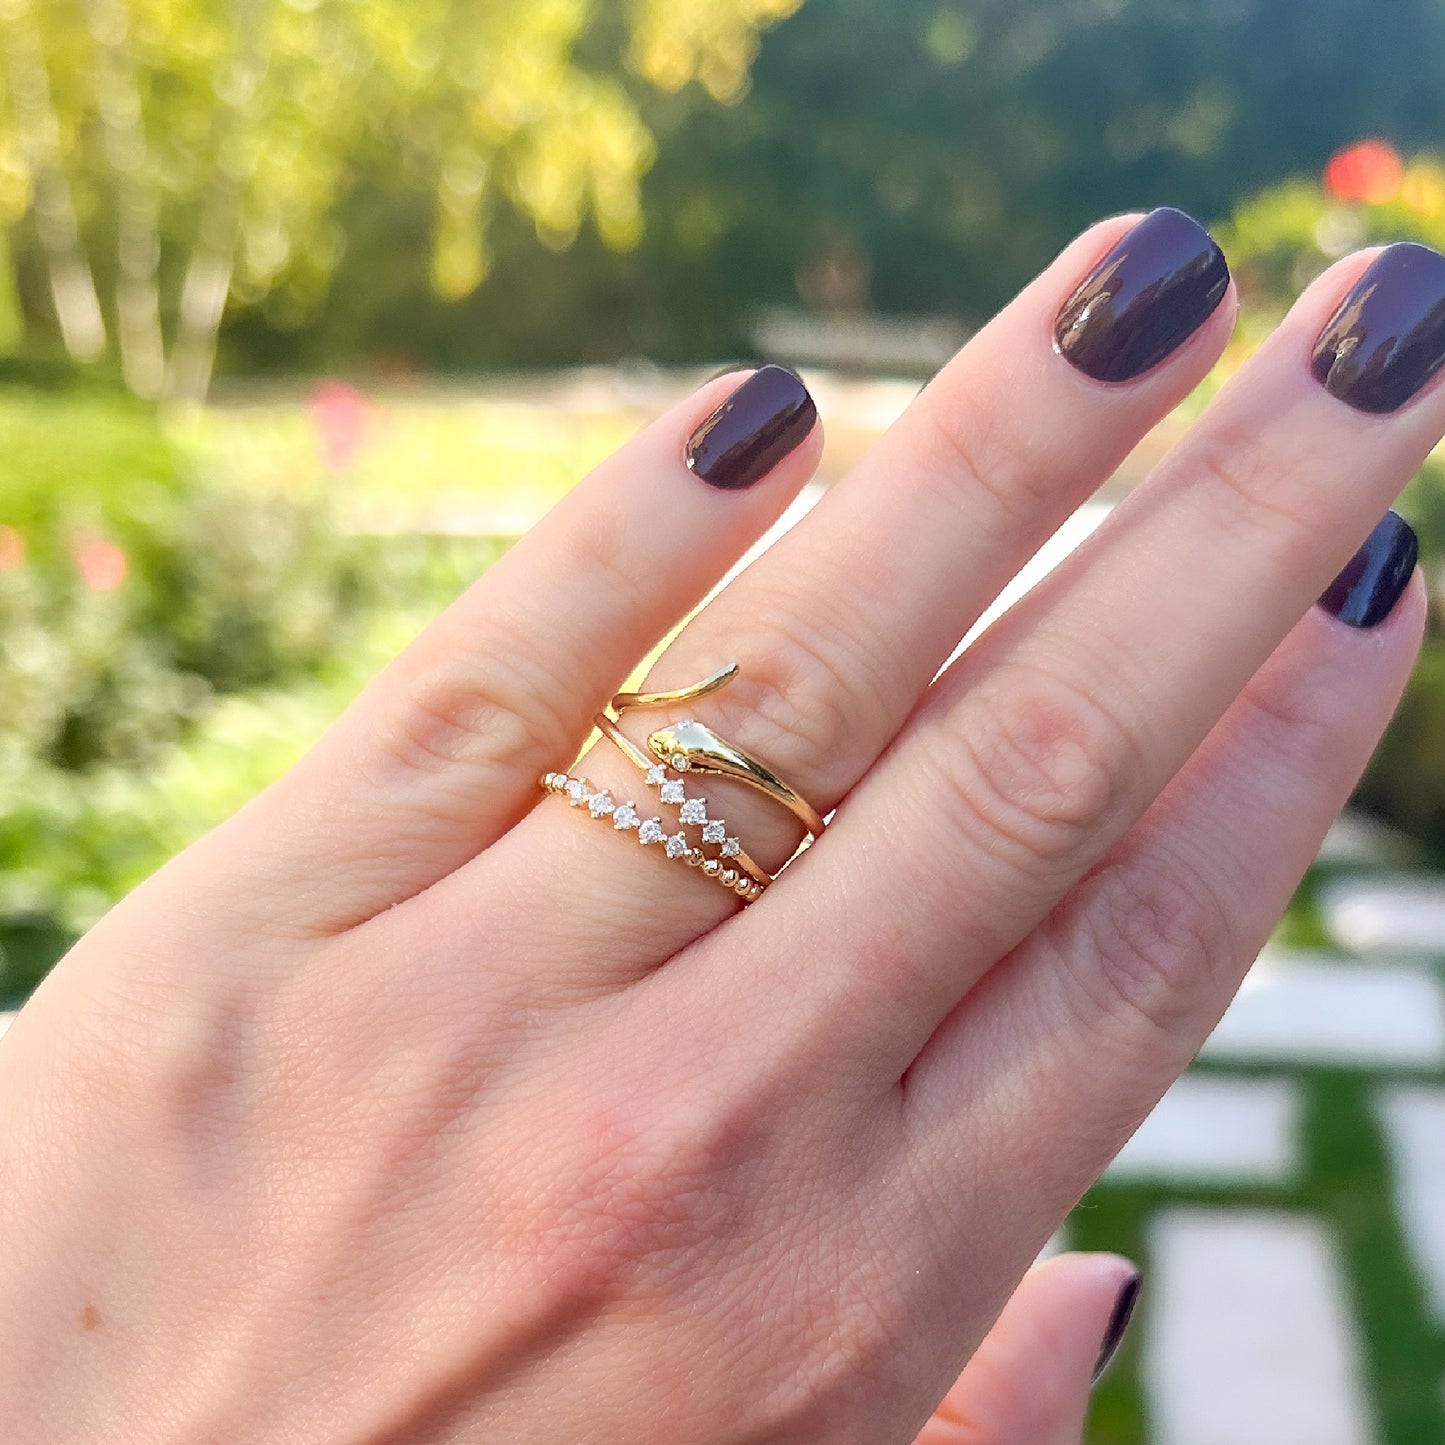 Dainty Diamond Fashion Rings in Gold from Alexandra Marks jewelry